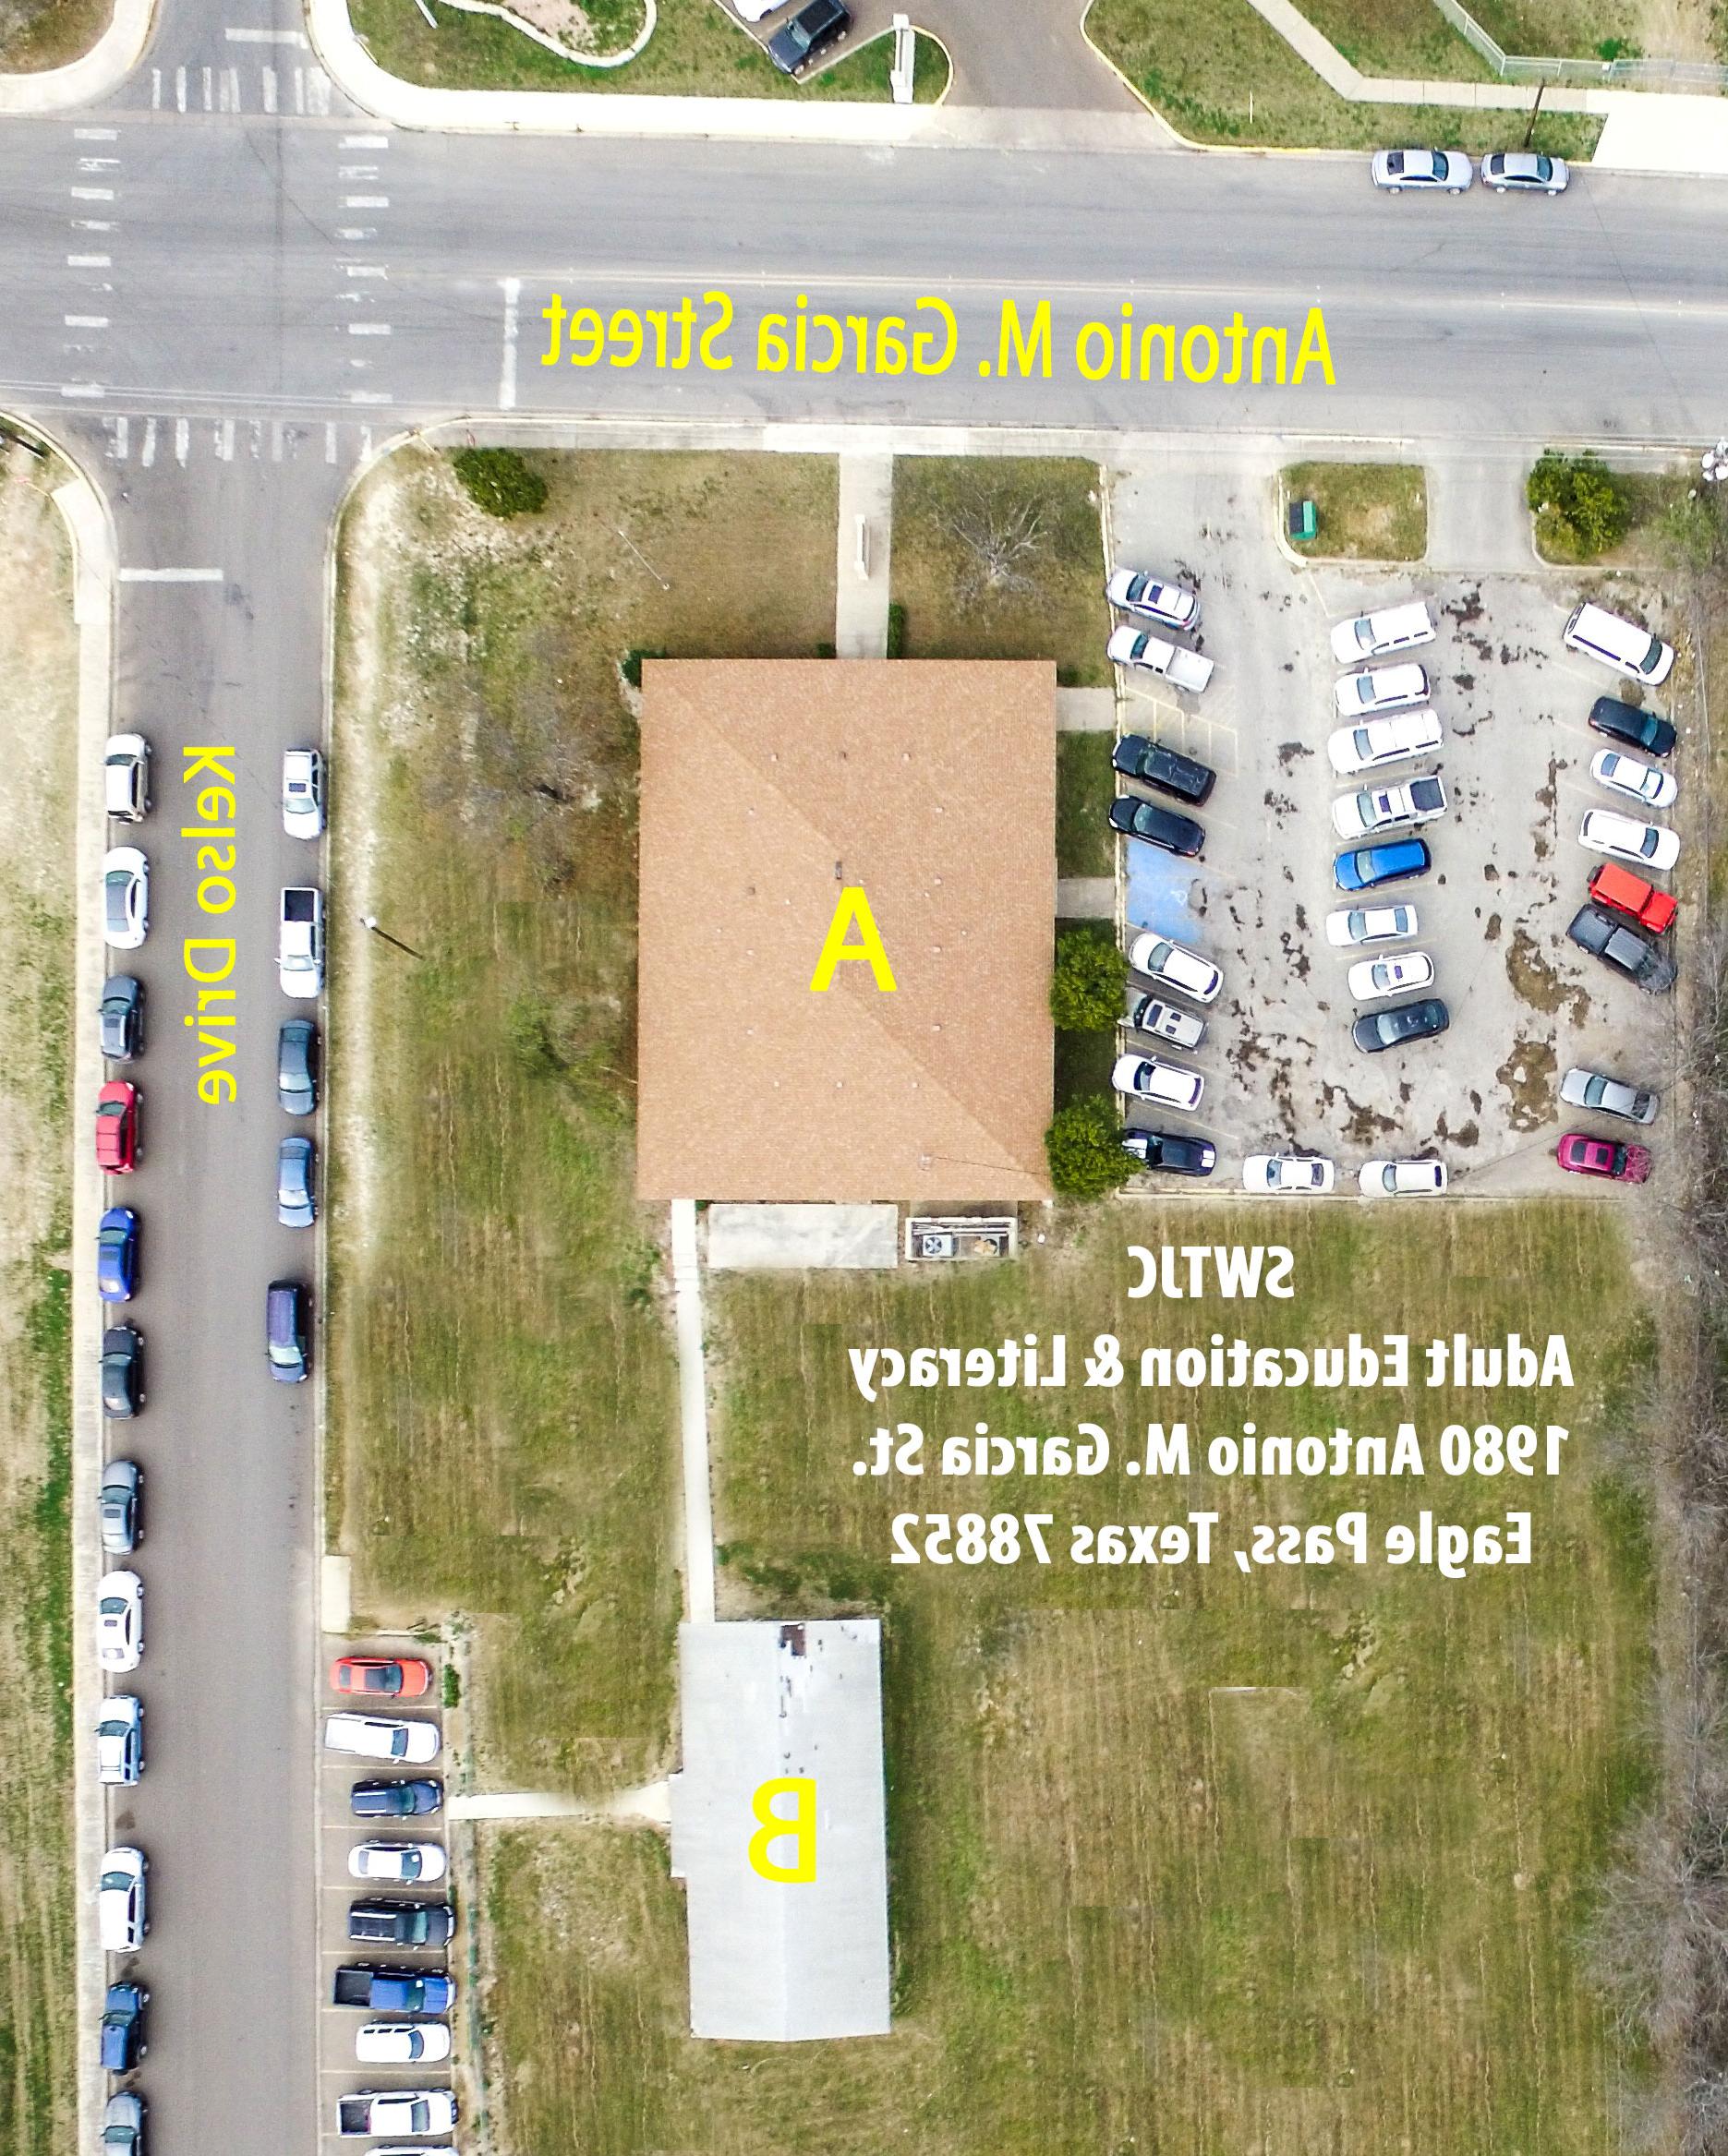 Eagle Pass Adult Education & Literacy Campus Map with Building ID